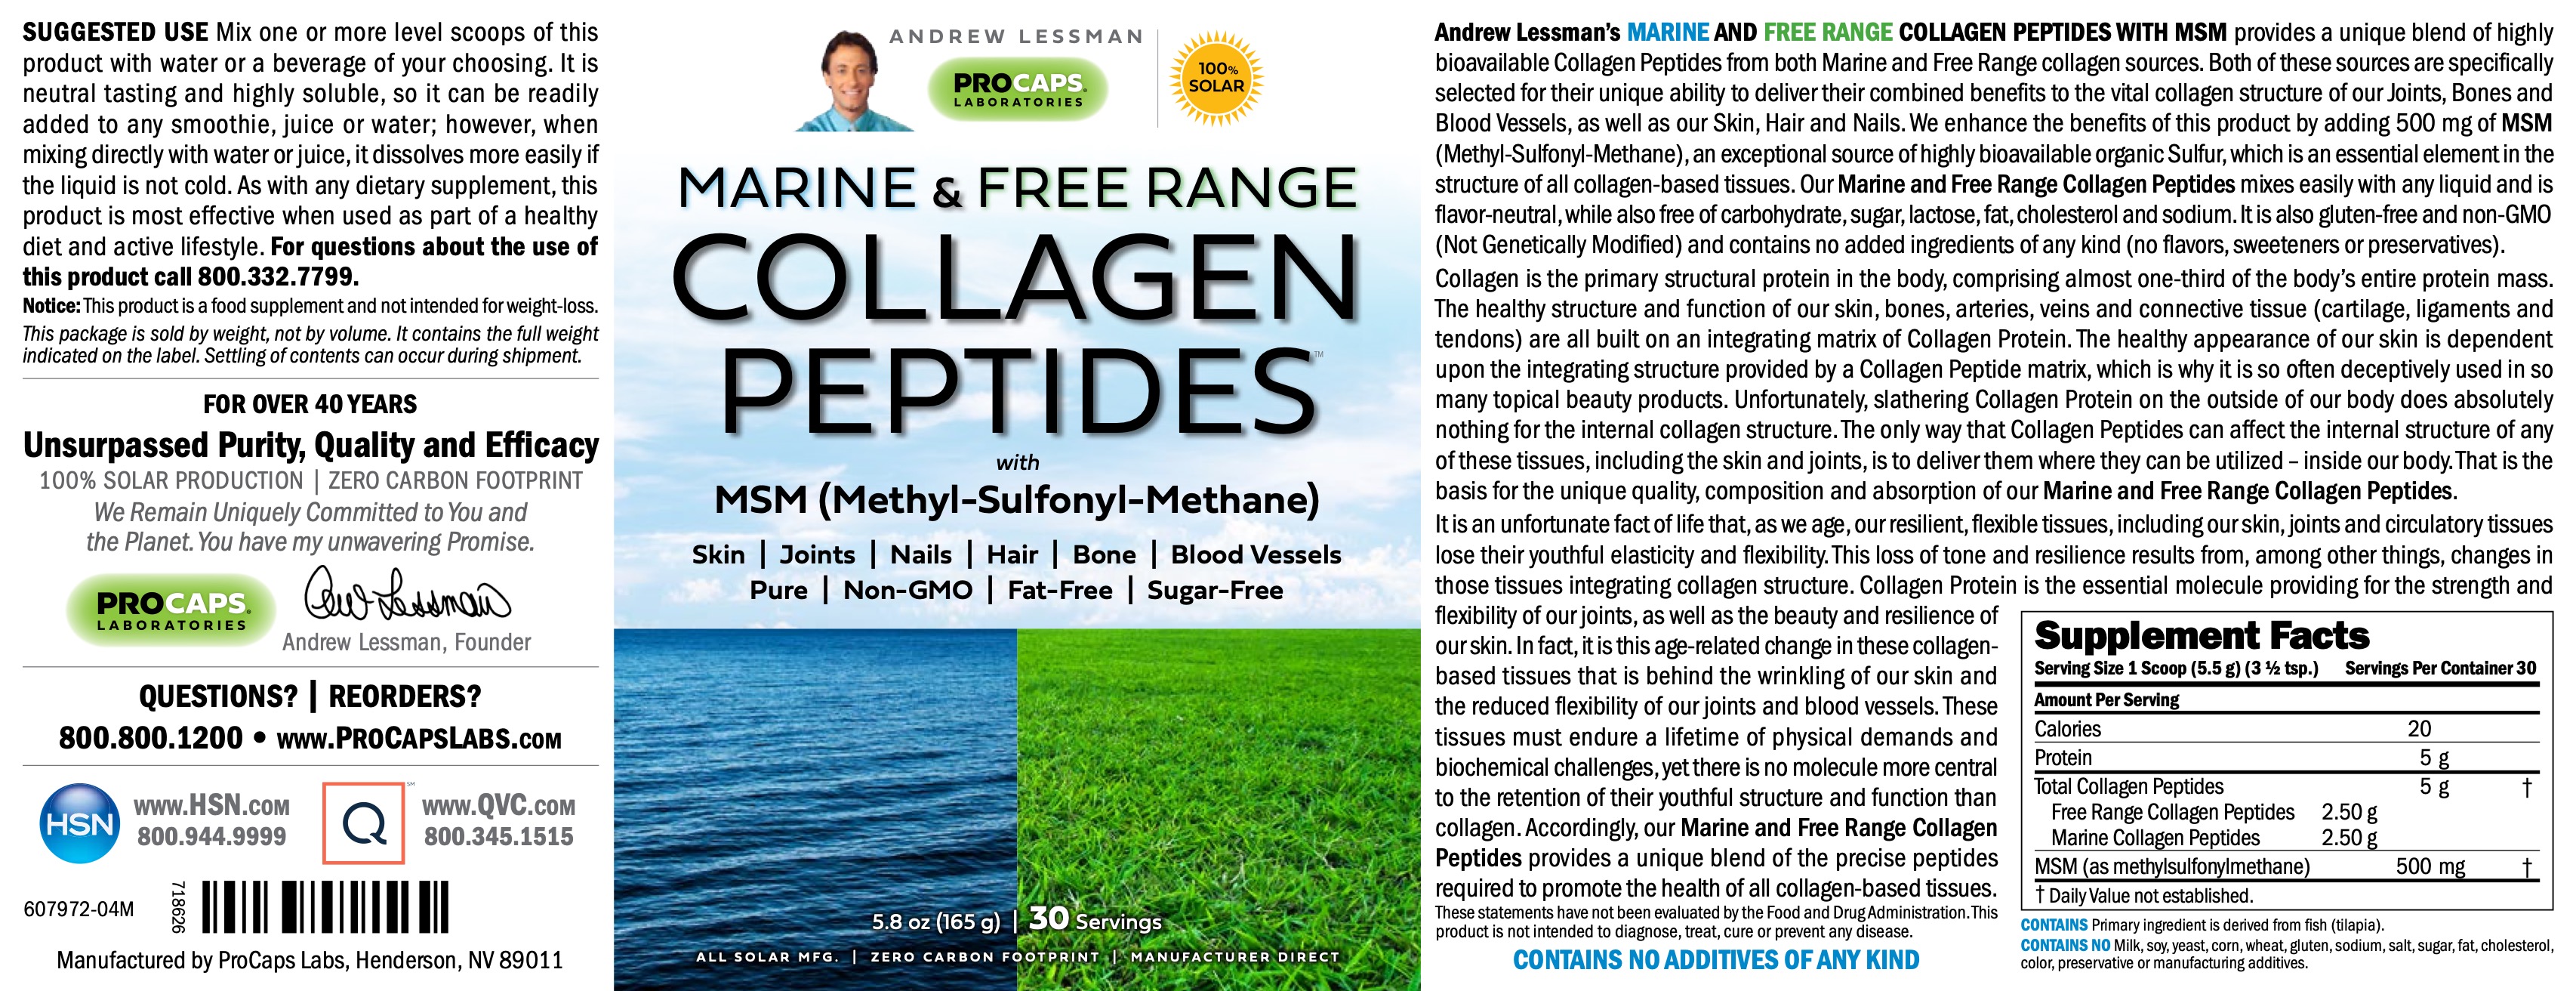 Marine-And-Free-Range-Collagen-Peptides-with-MSM-Beauty-and-Joint-Support